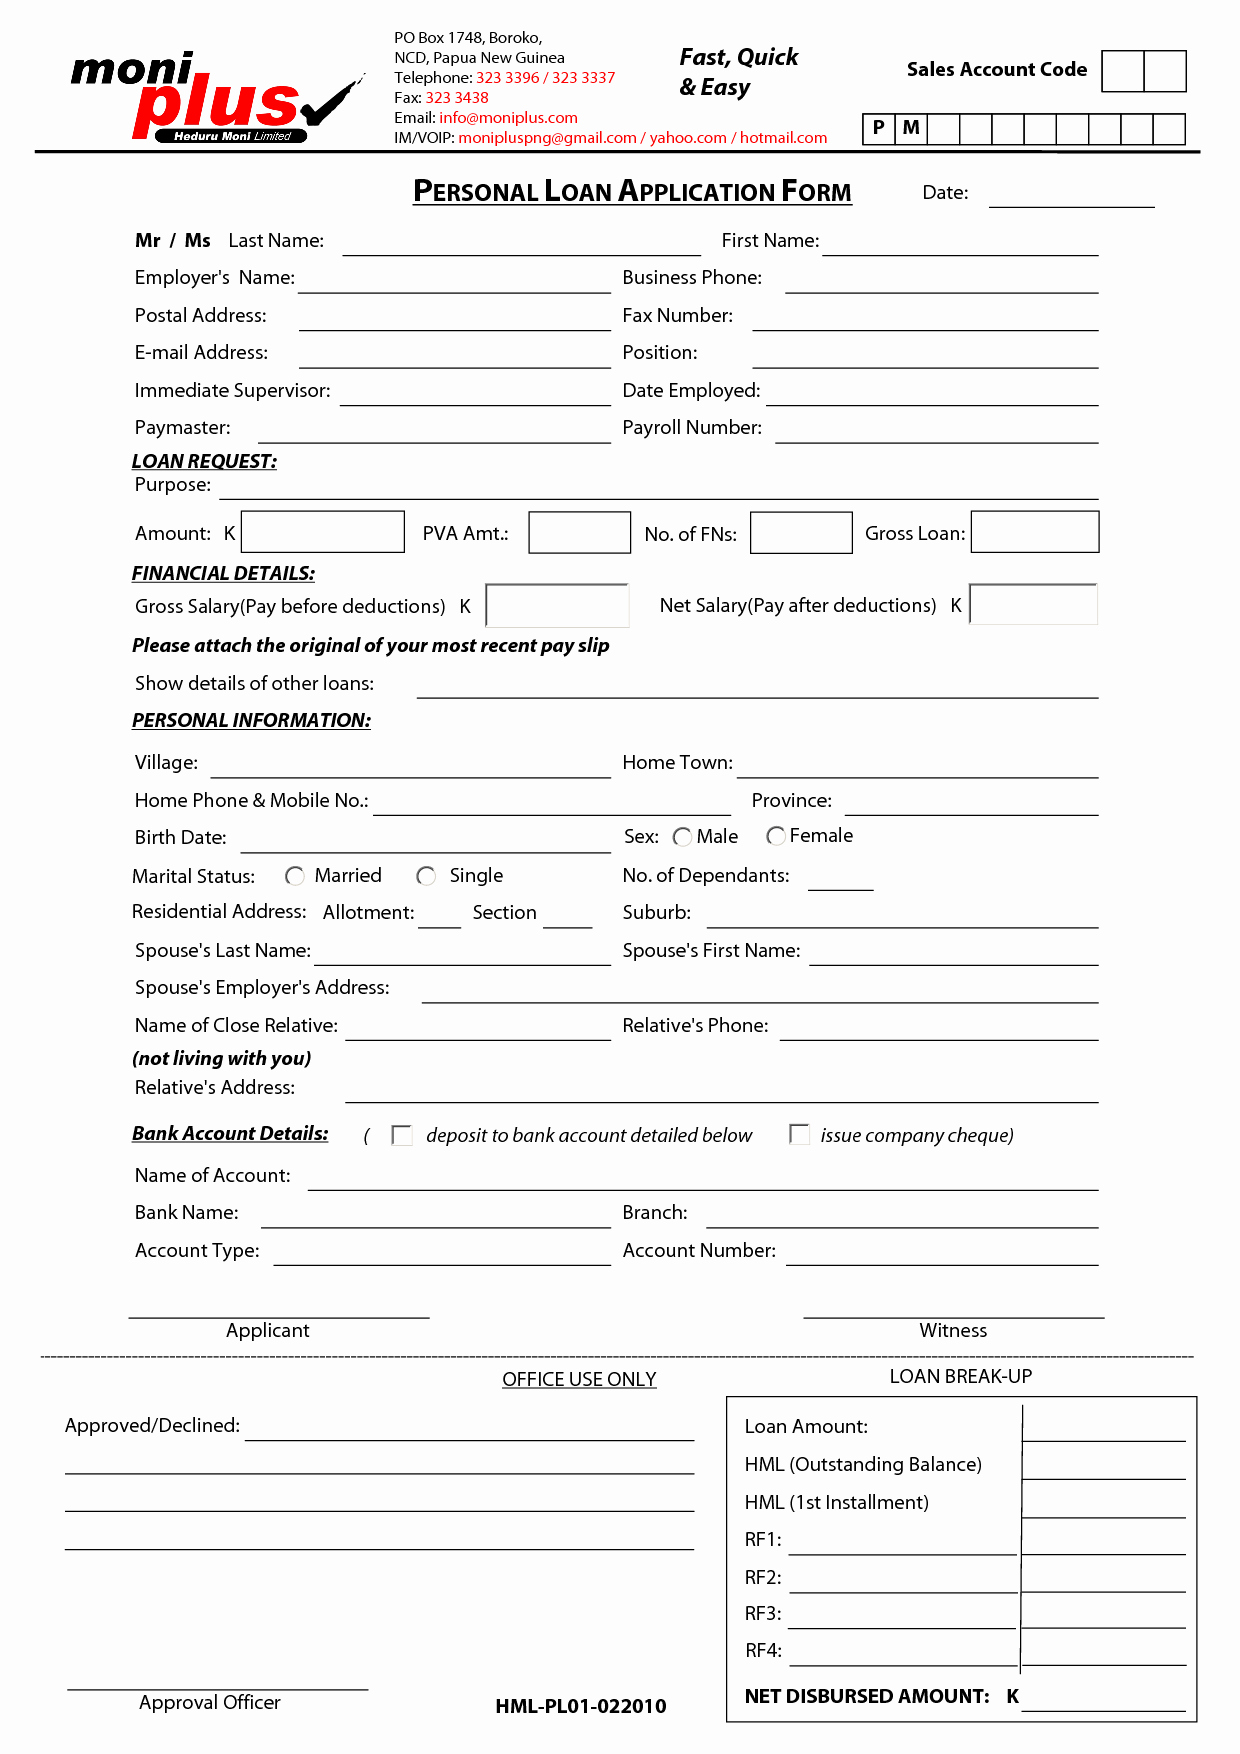 Personal Loan Contract Template Free Inspirational Free Printable Personal Loan Contract form Generic